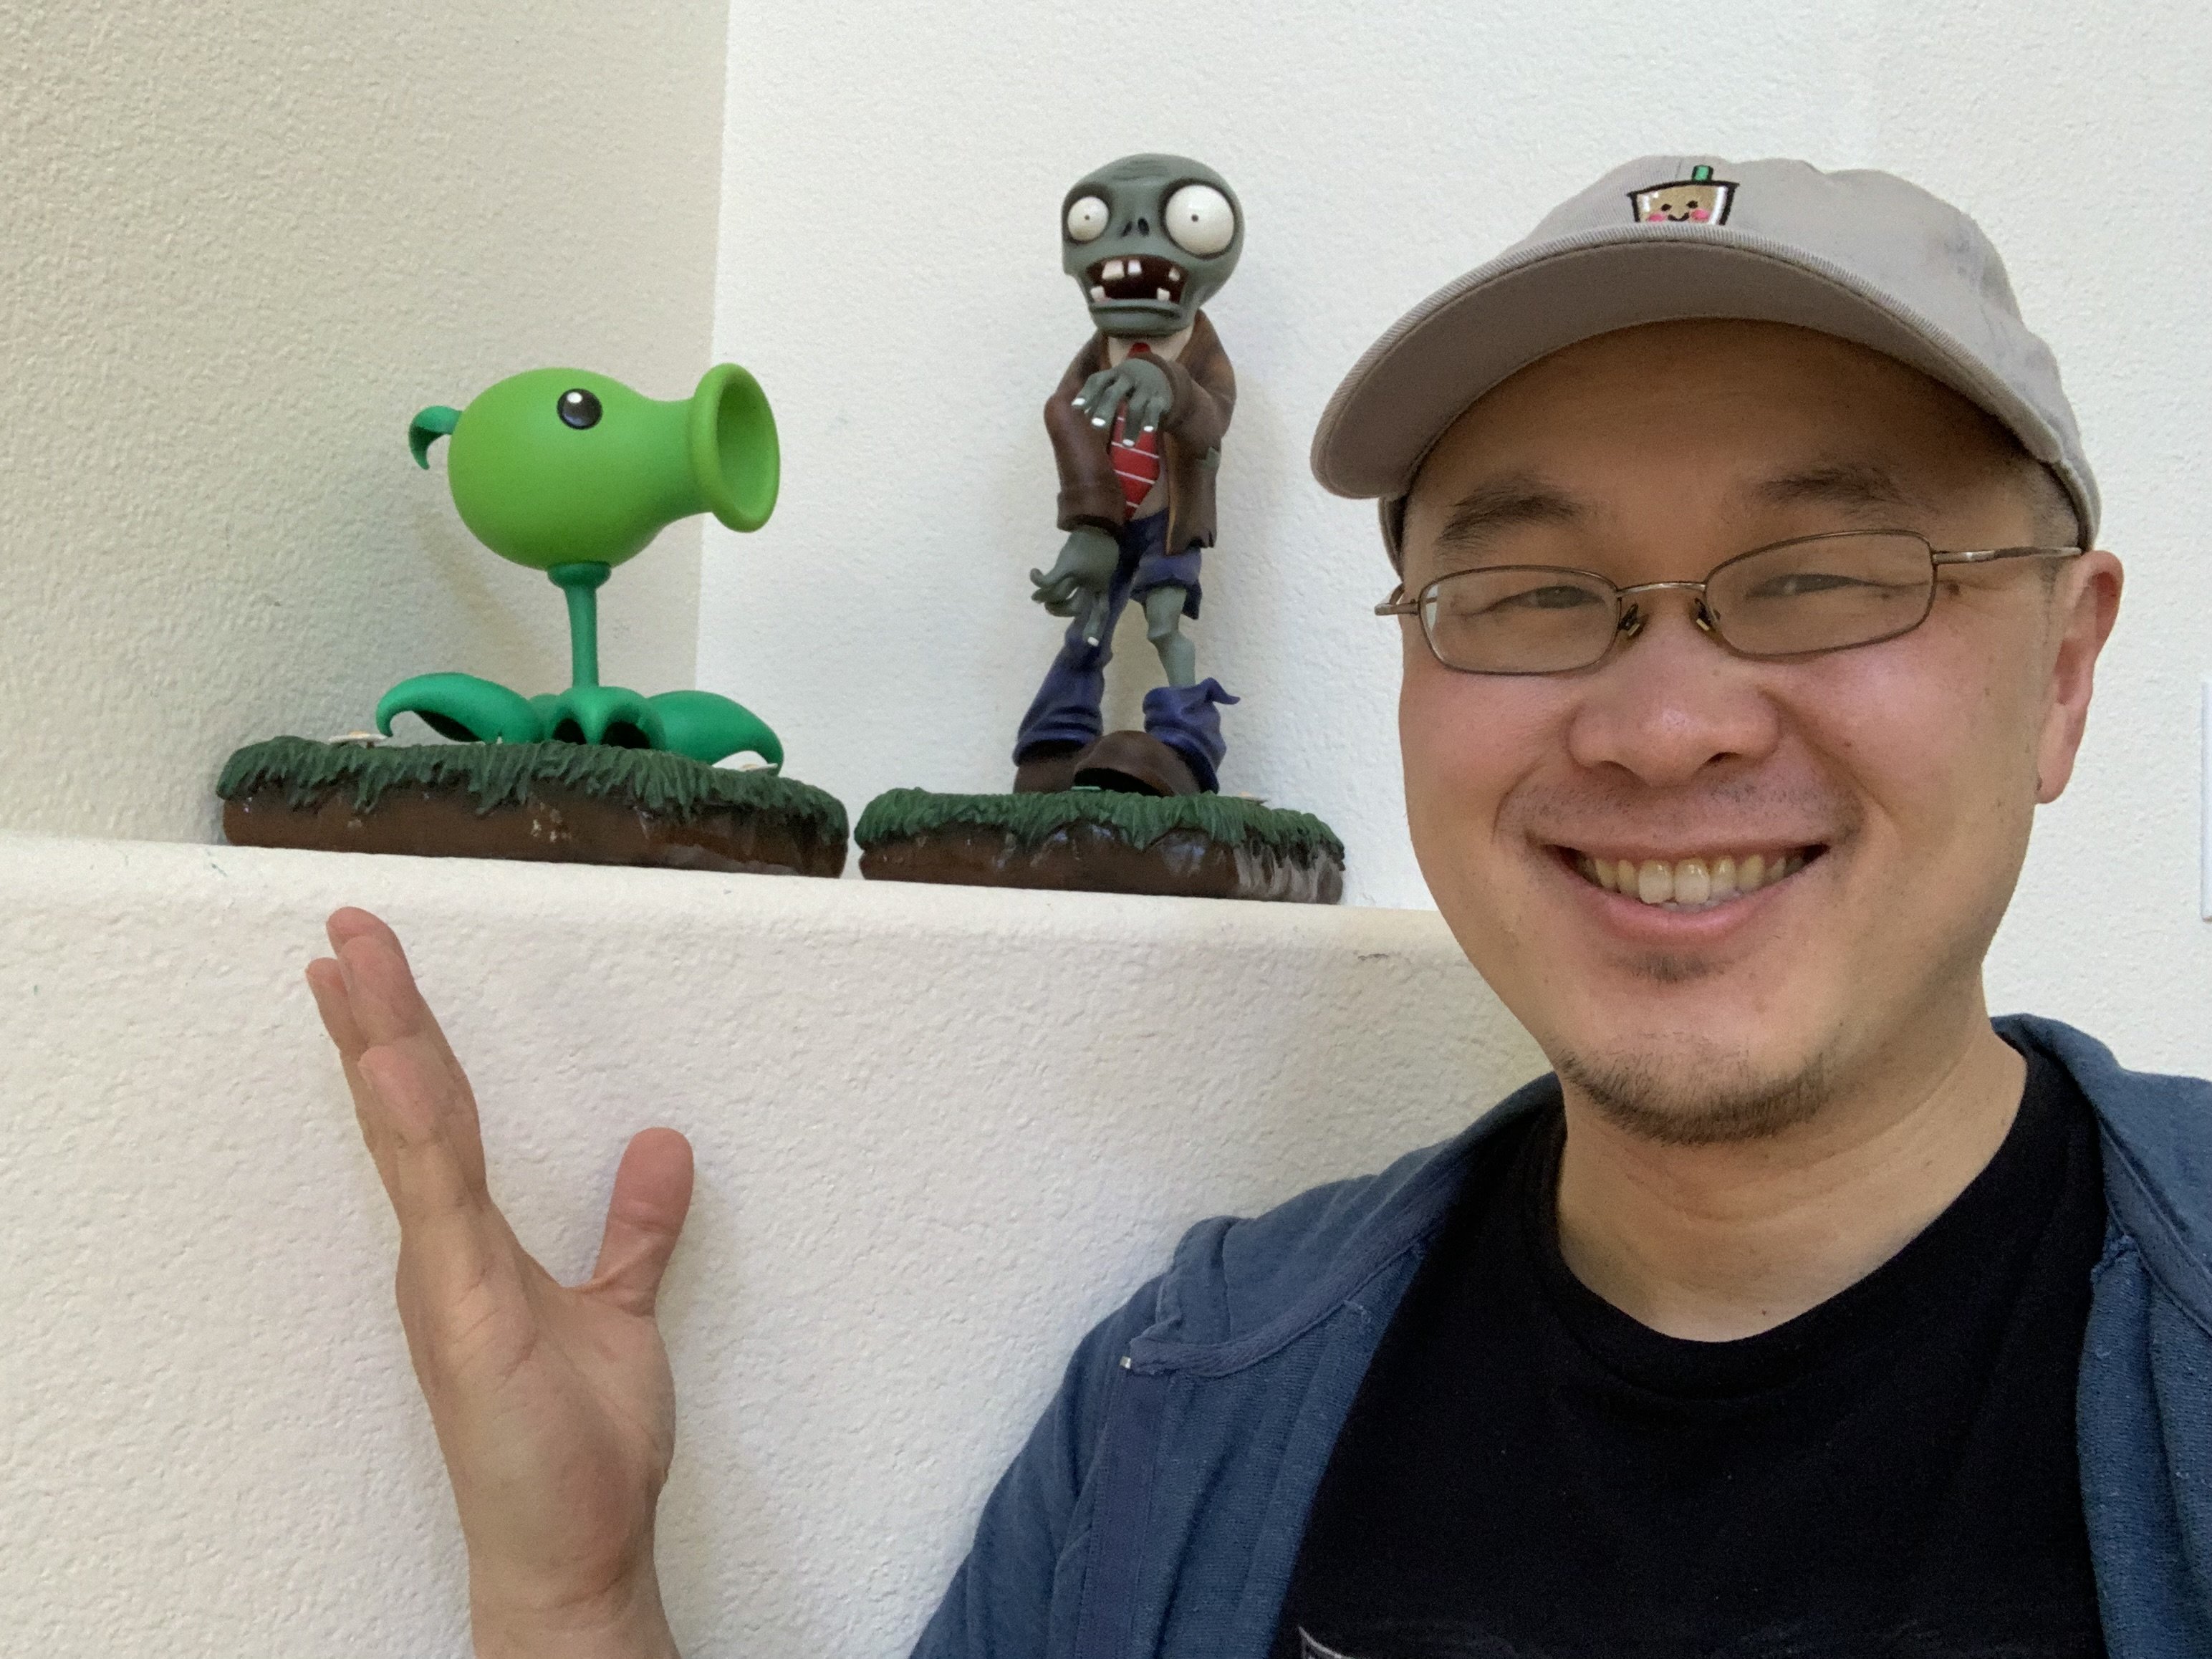 Interview: George Fan on Hardhat Wombat and Cube Shaped Poop